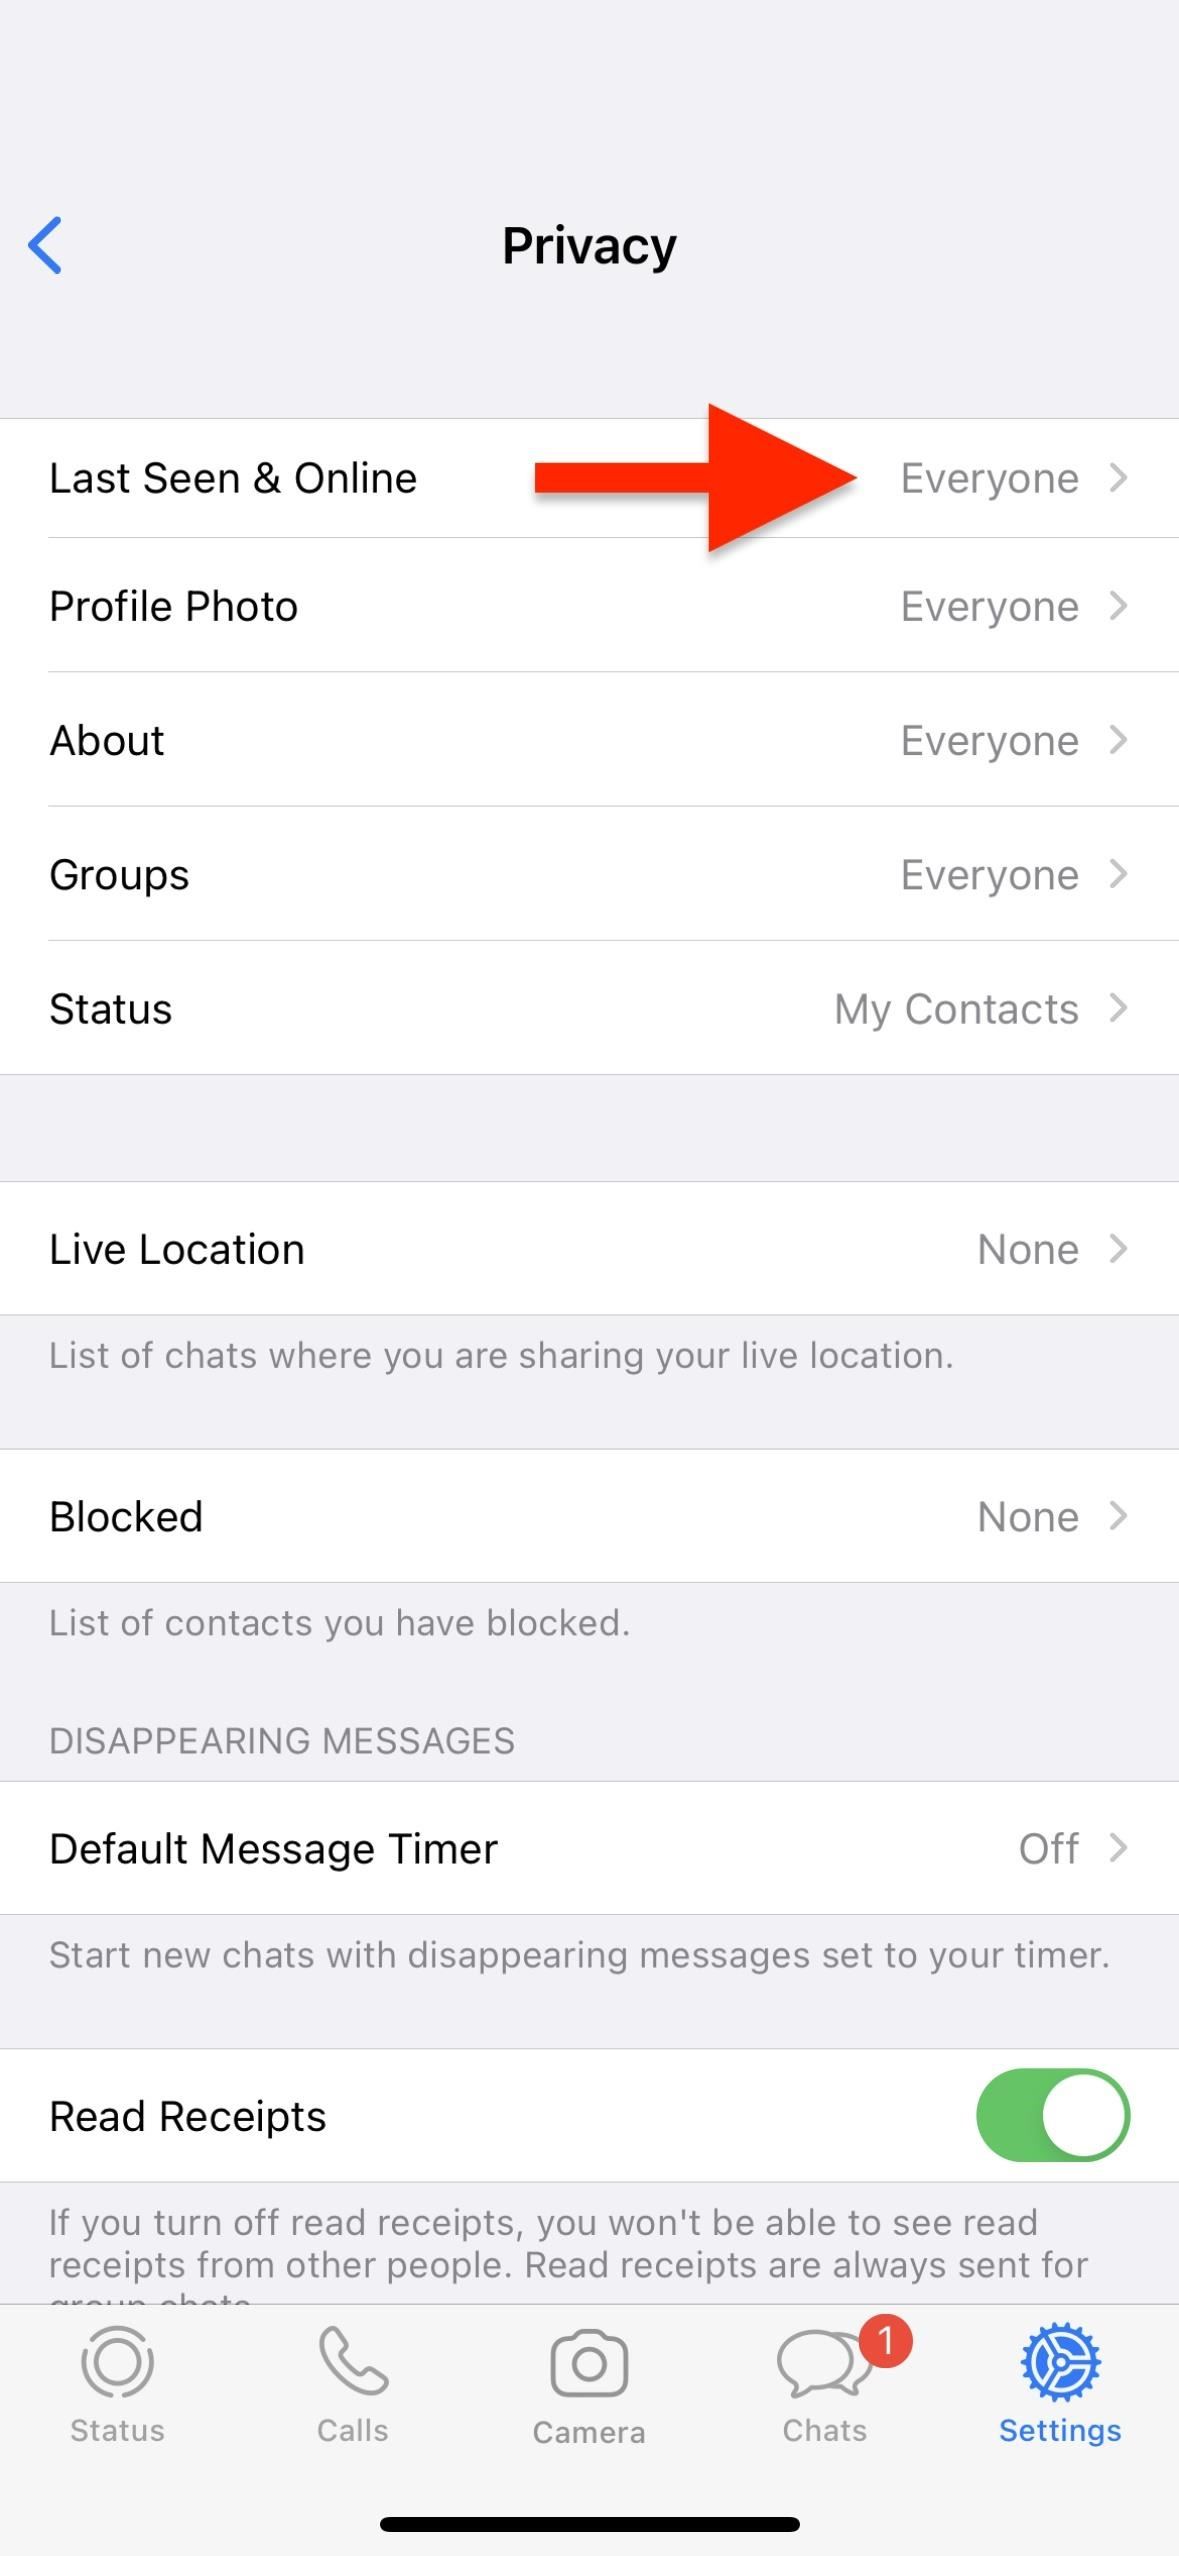 Hide Your WhatsApp Online and Last Seen Statuses from Everyone or Just Some of Your Contacts